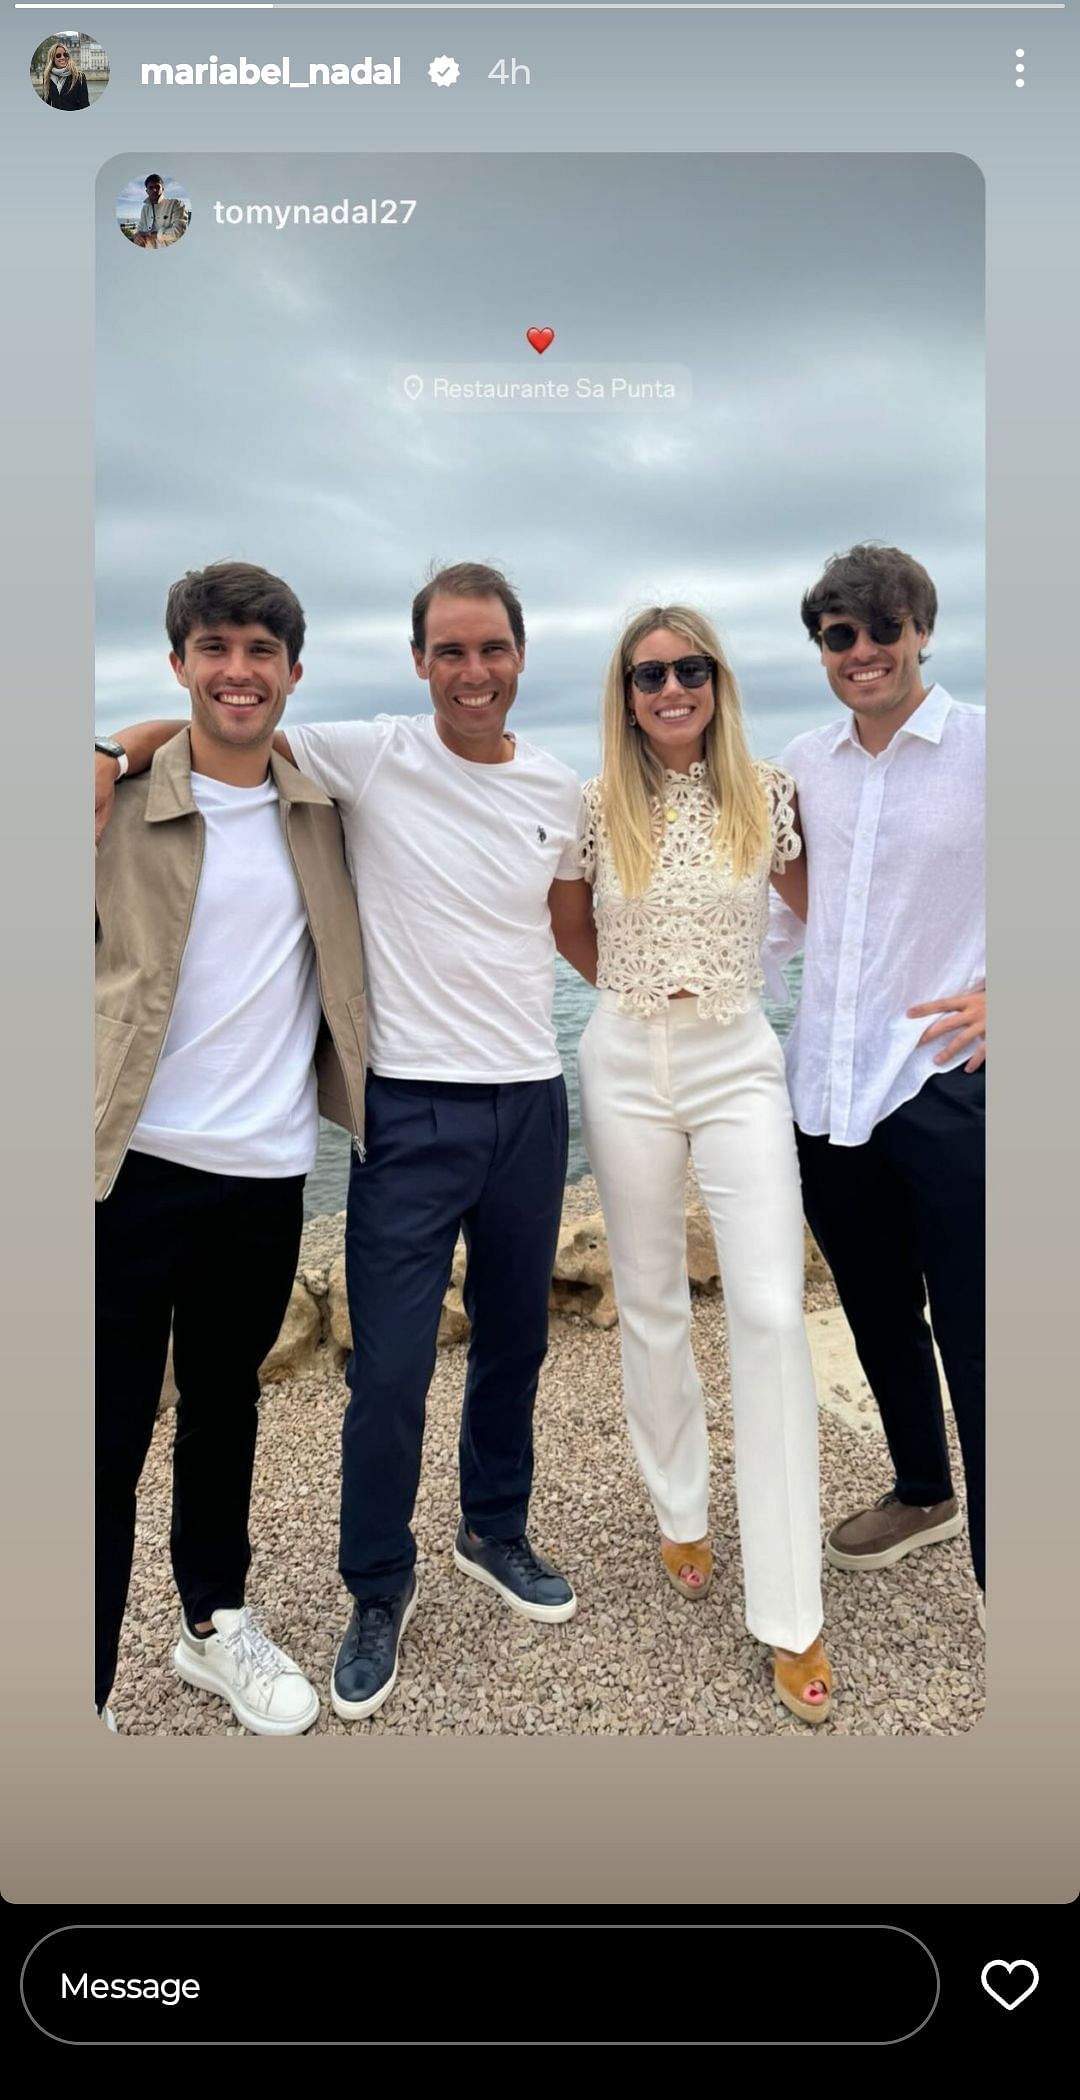 The Spaniard&#039;s sister Maribel shared a picture of them posing with their cousins on Sunday, June 16 (Instagram)